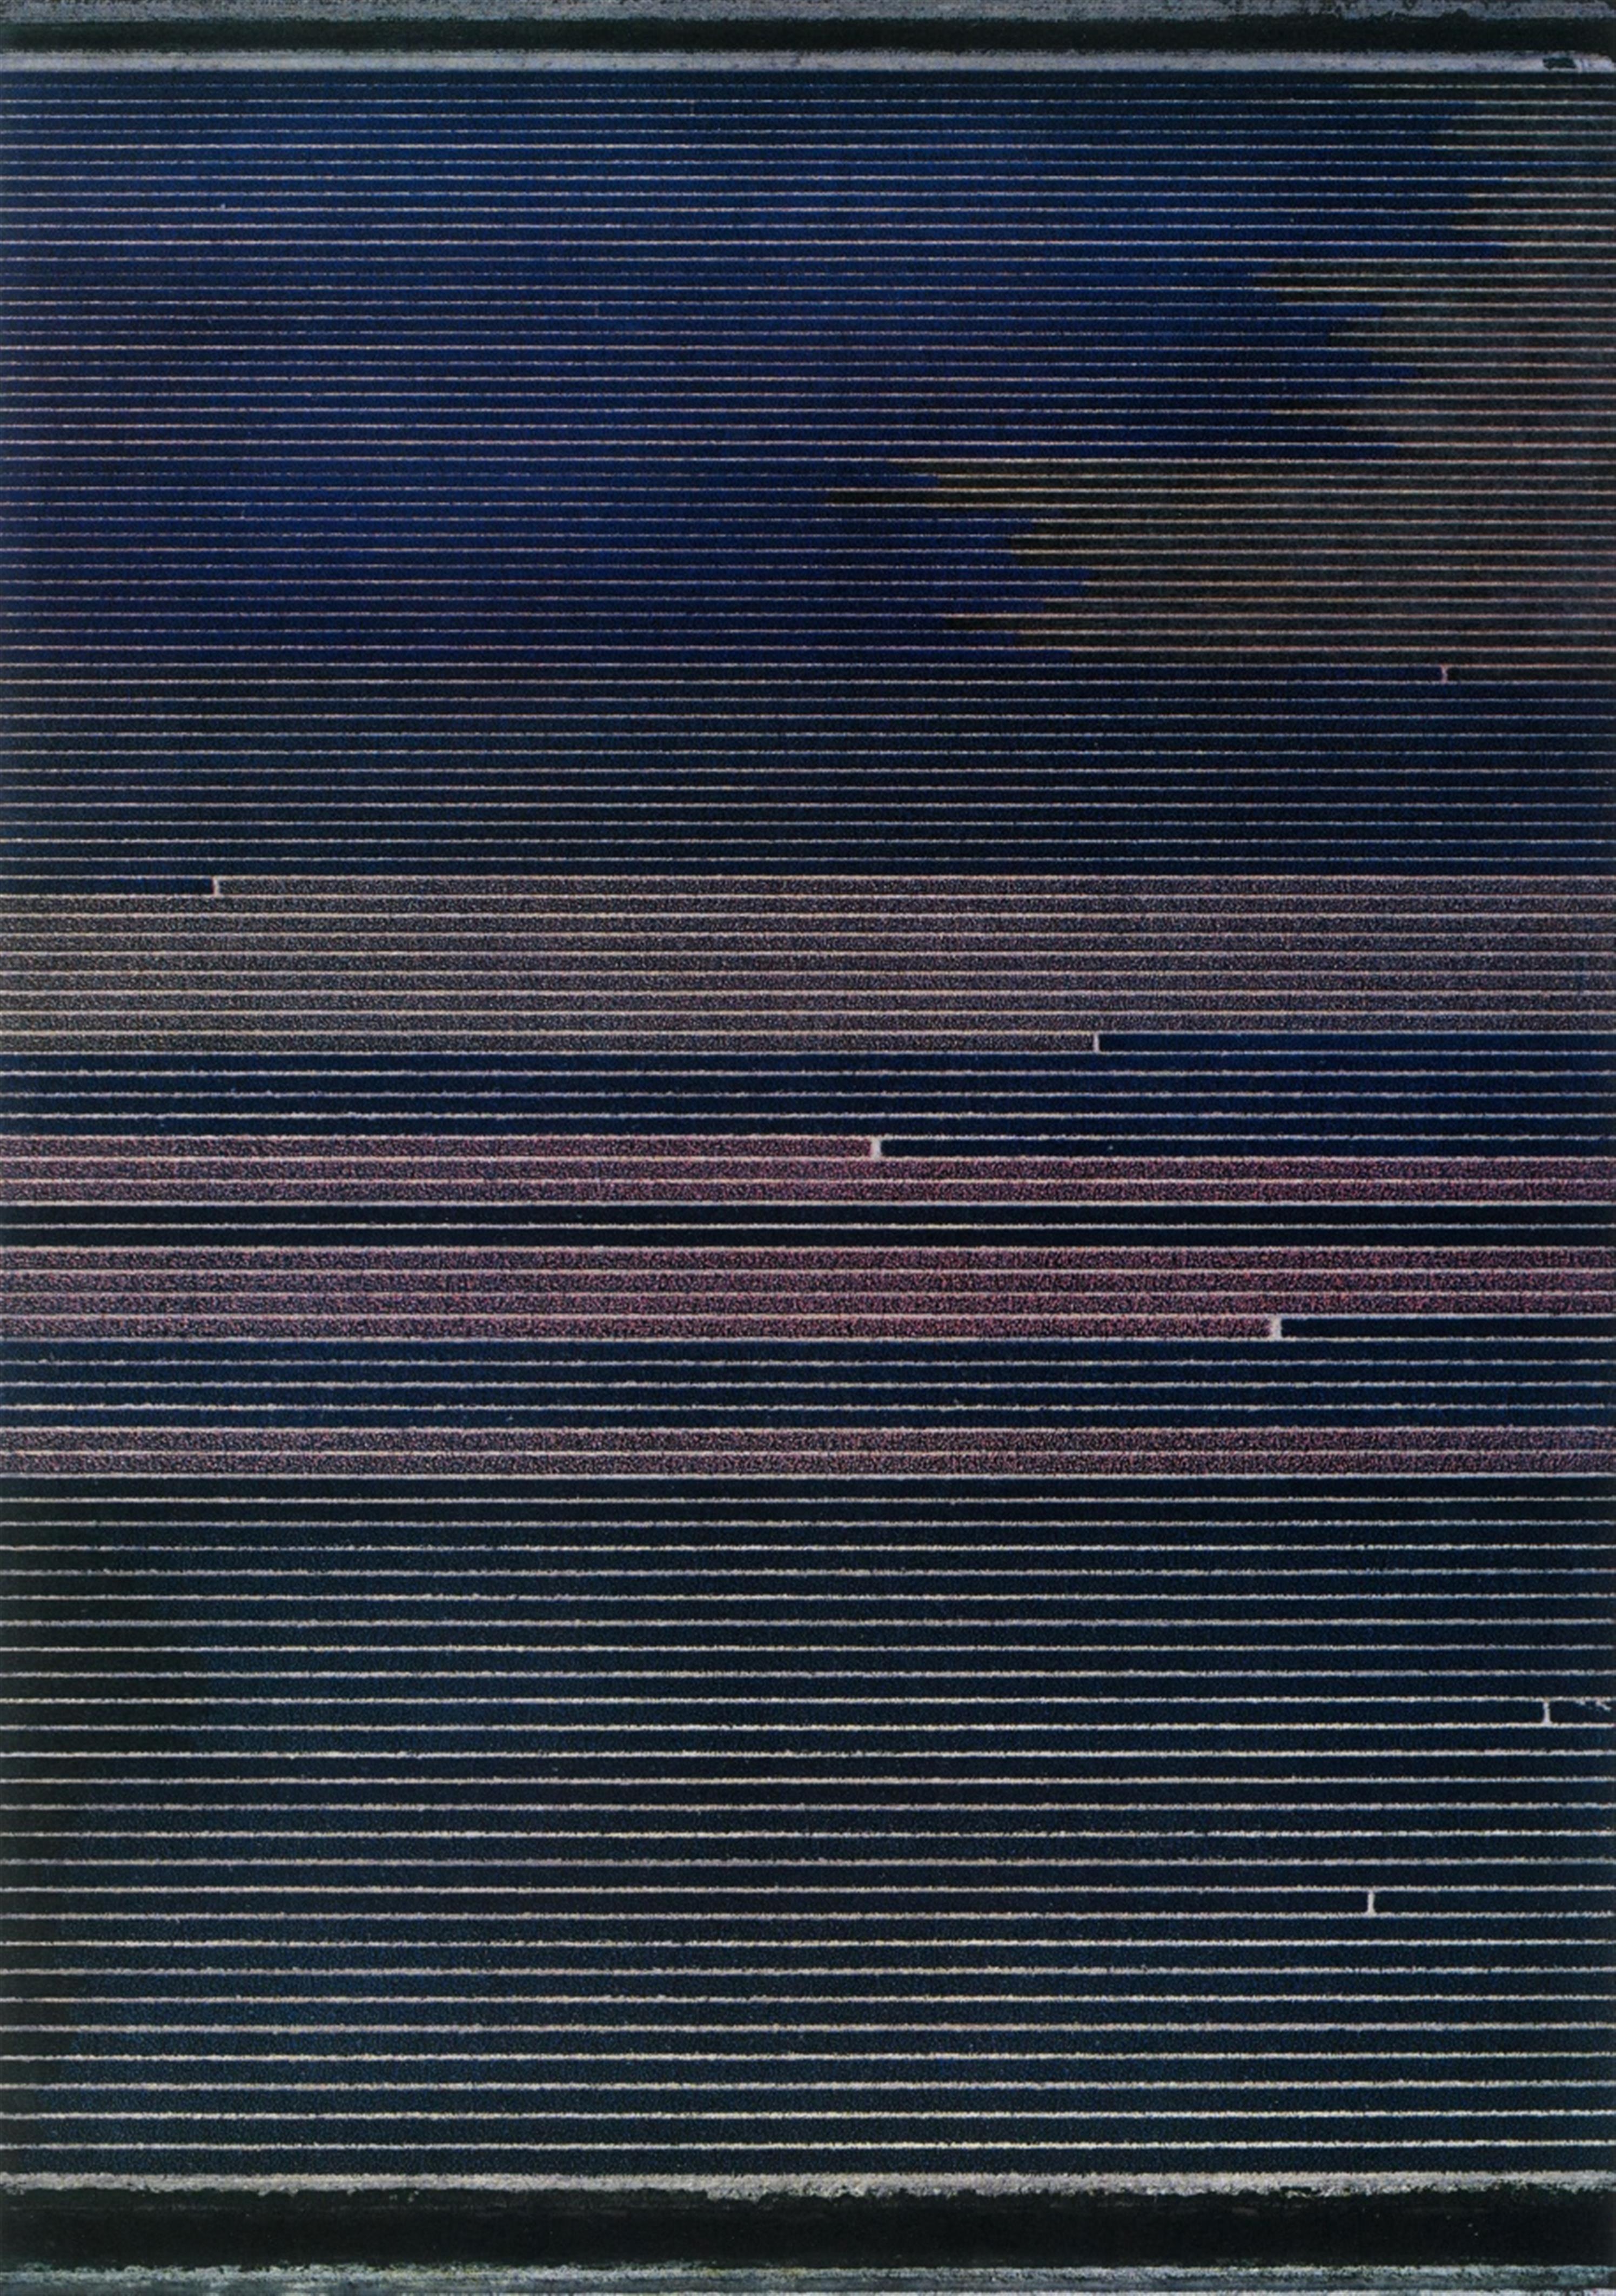 Andreas Gursky - Untitled XX - image-1